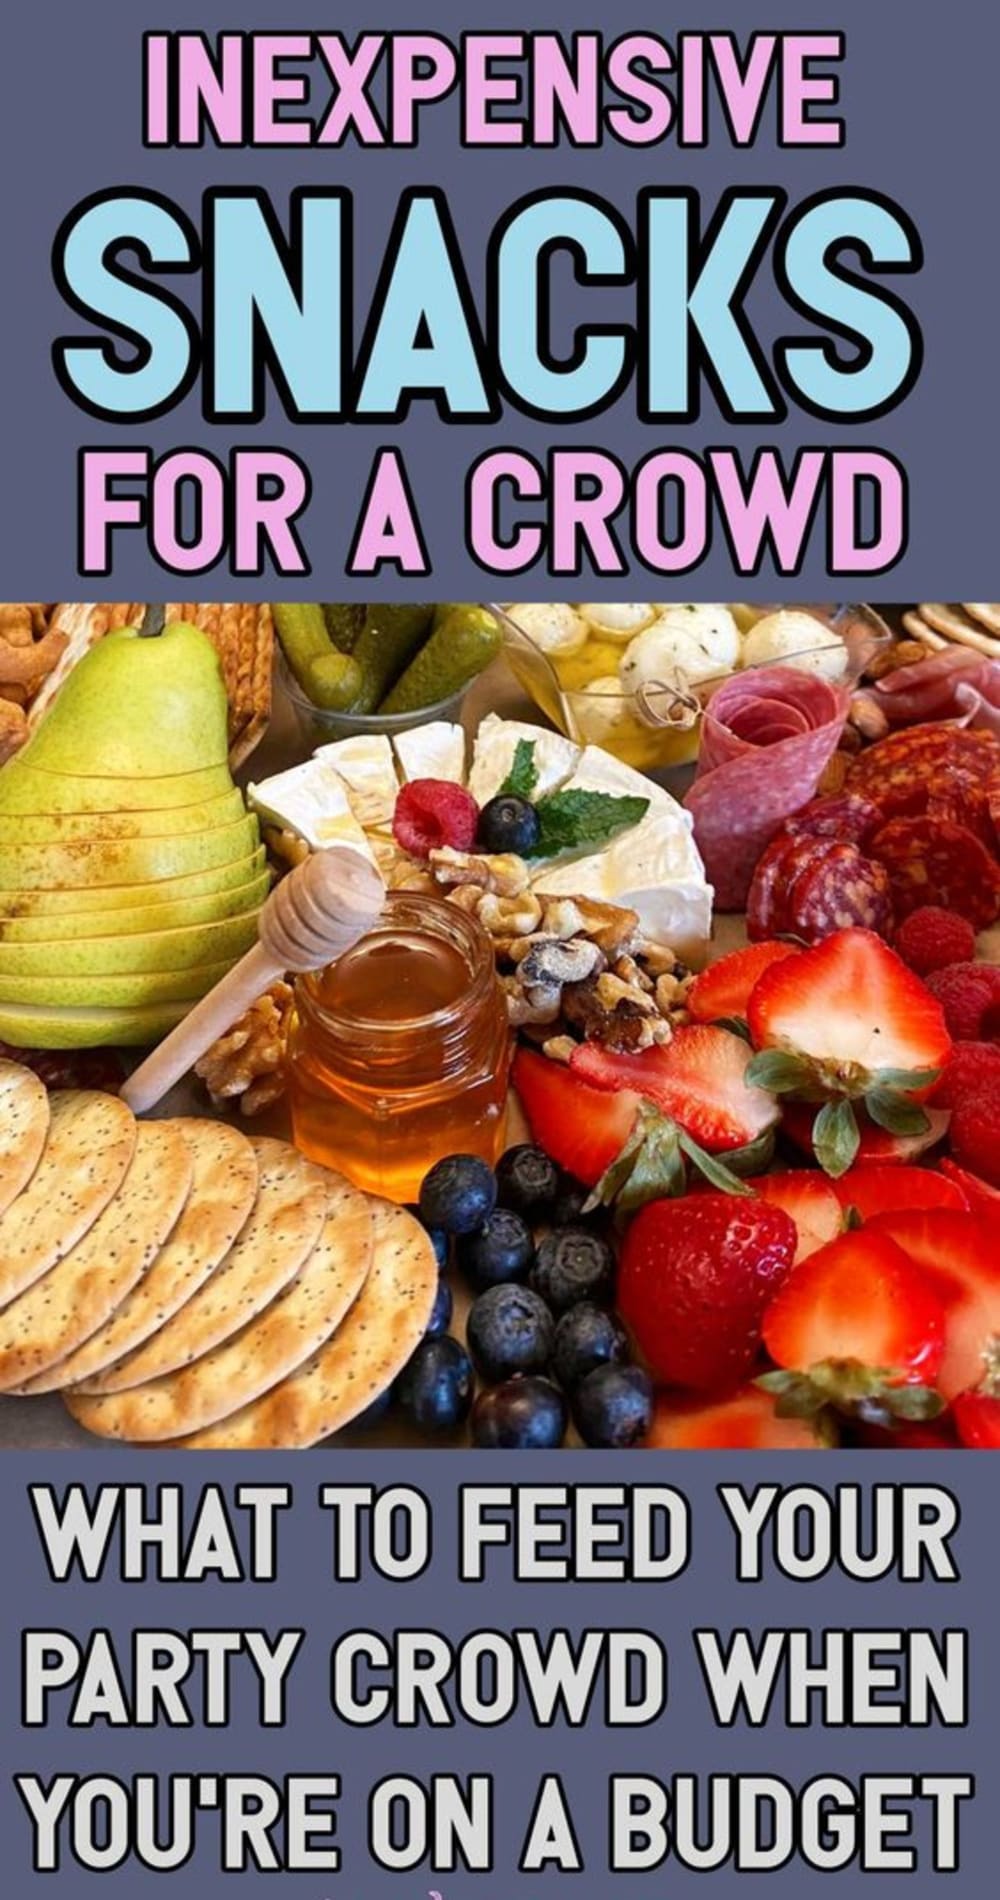 Party snack ideas - cheap and easy snack ideas for party crowds and large groups - store-bought, last minute and make ahead ideas too. If you need inexpensive snack ideas for hosting a large group, you will love these simple, budget-friendly ideas